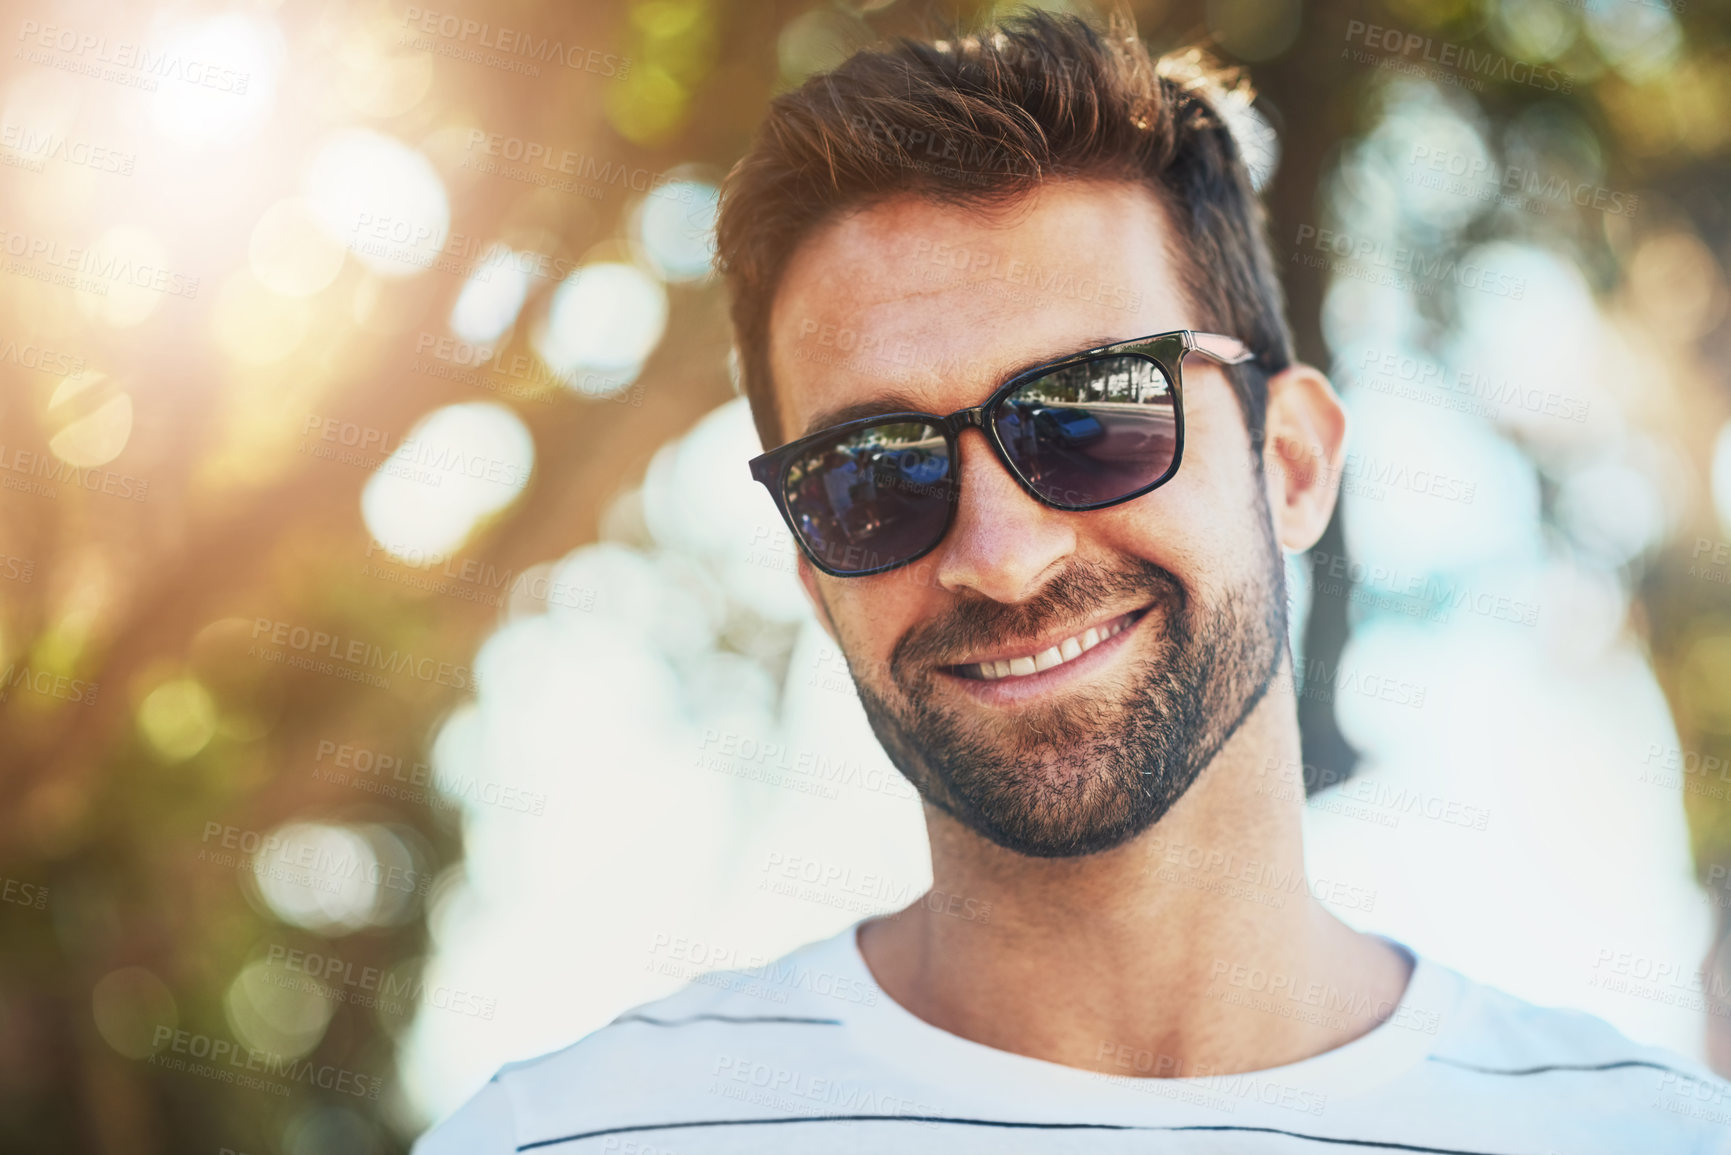 Buy stock photo Sunglasses, casual and portrait of a happy man in an outdoor park while on a vacation, adventure or holiday. Smile, confidence and young male person with eyewear standing in a garden on weekend trip.